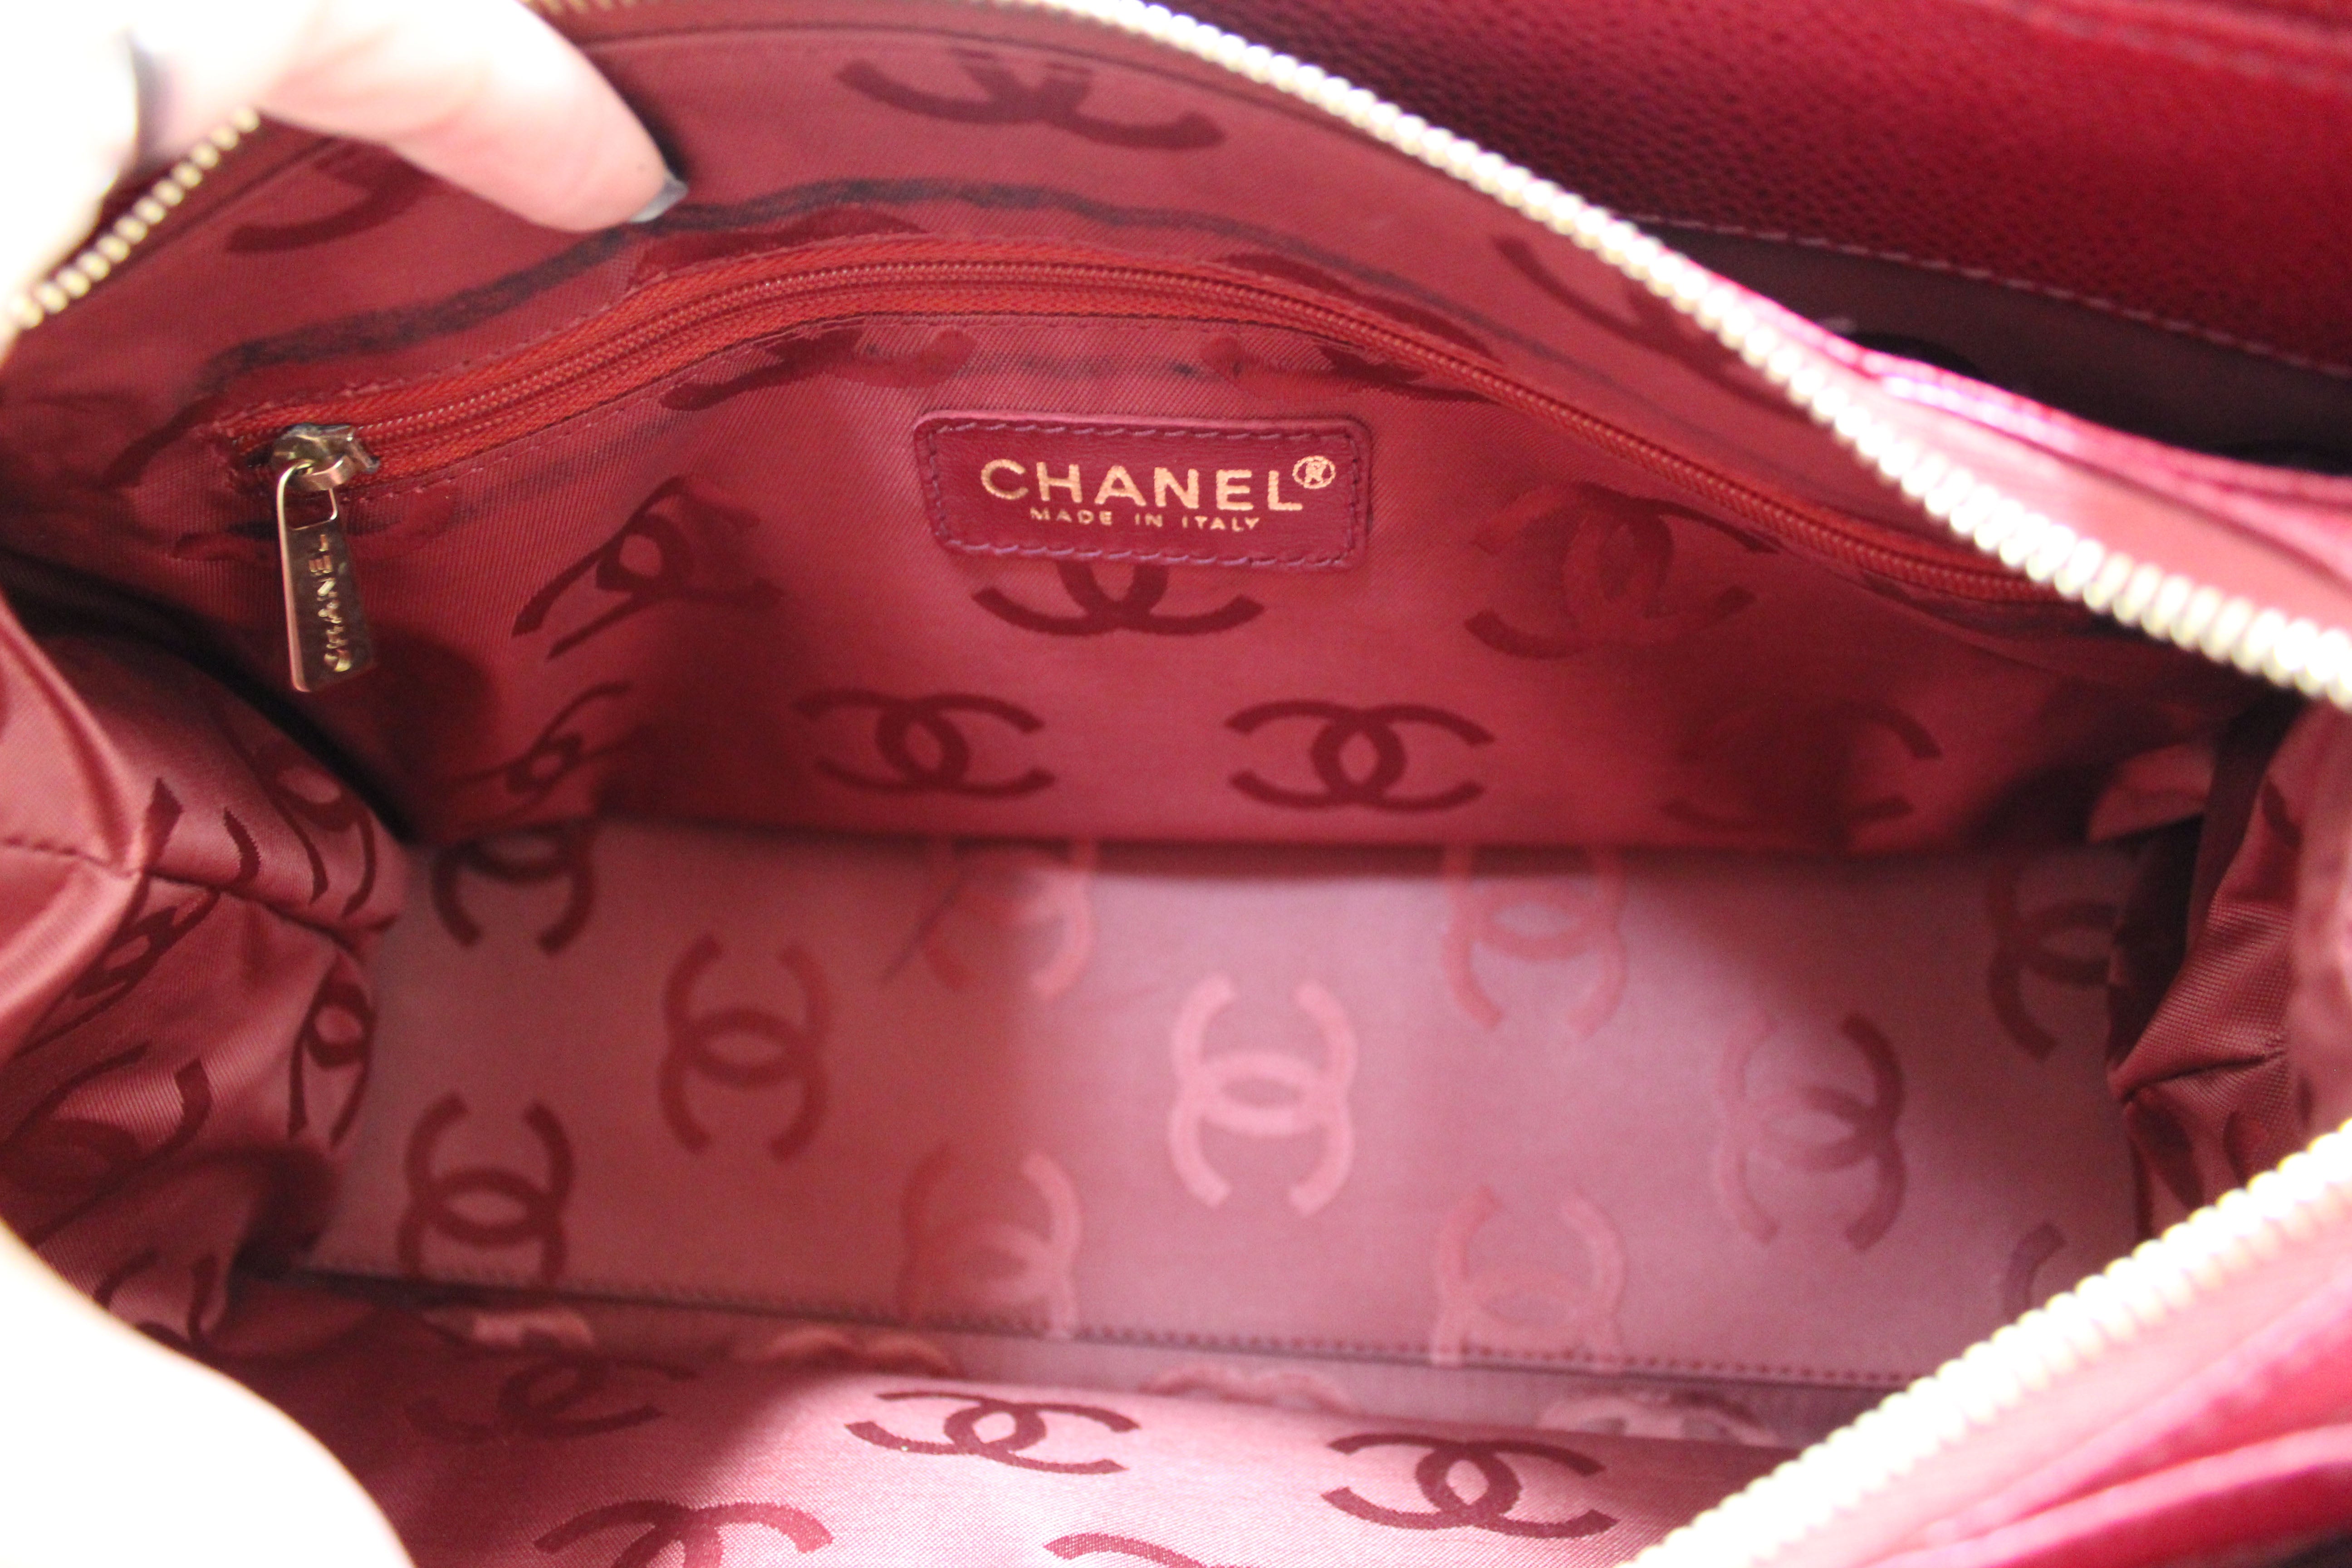 Authentic Chanel Vintage Deep Red Caviar Leather Small Tote Shoulder Bag